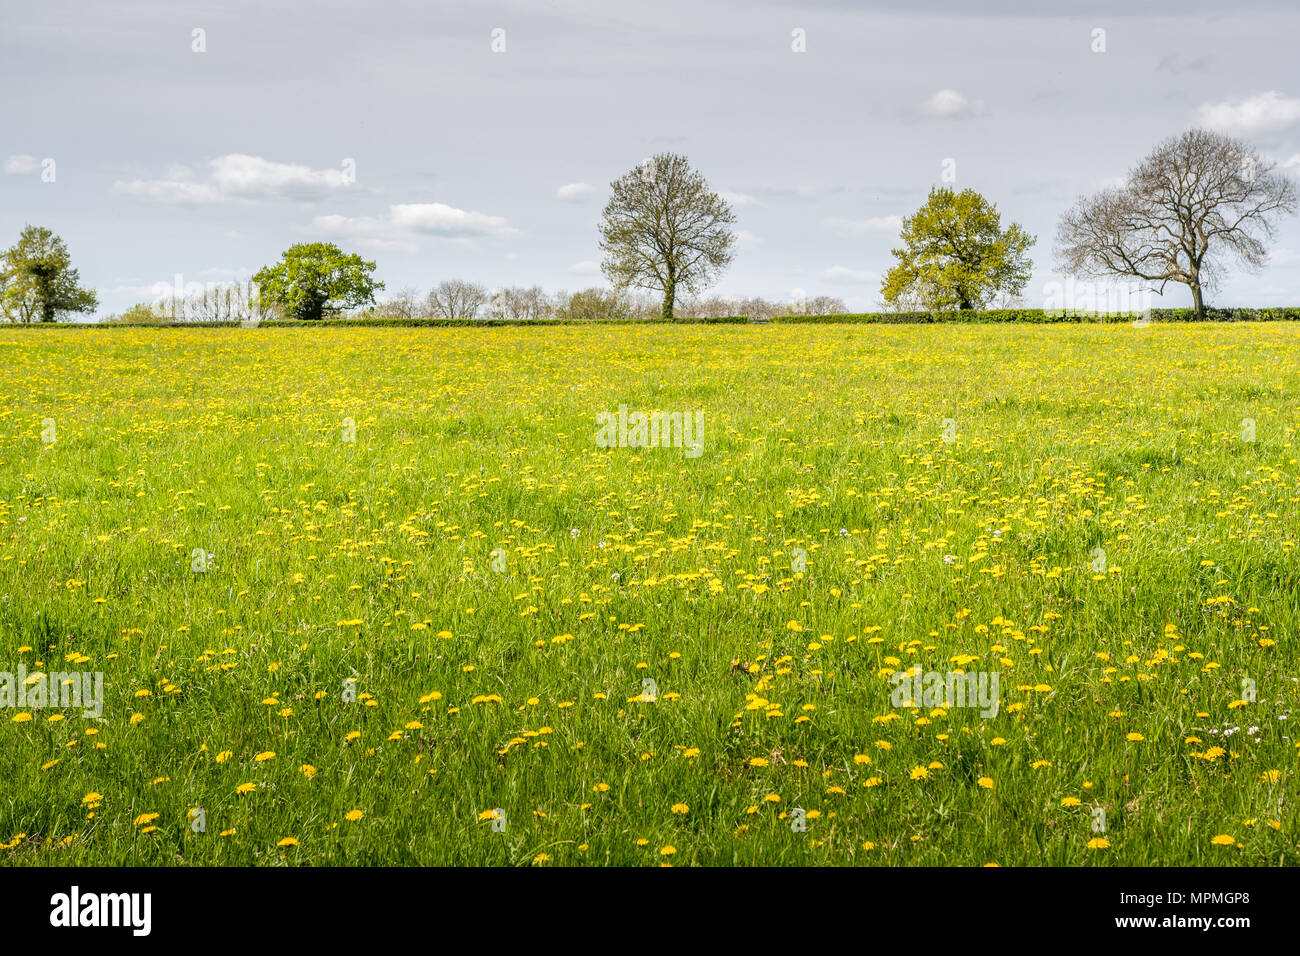 Abundance of dandelions flowering in a meadow during springtime in the Peak district national park, Staffordshire, England. Stock Photo